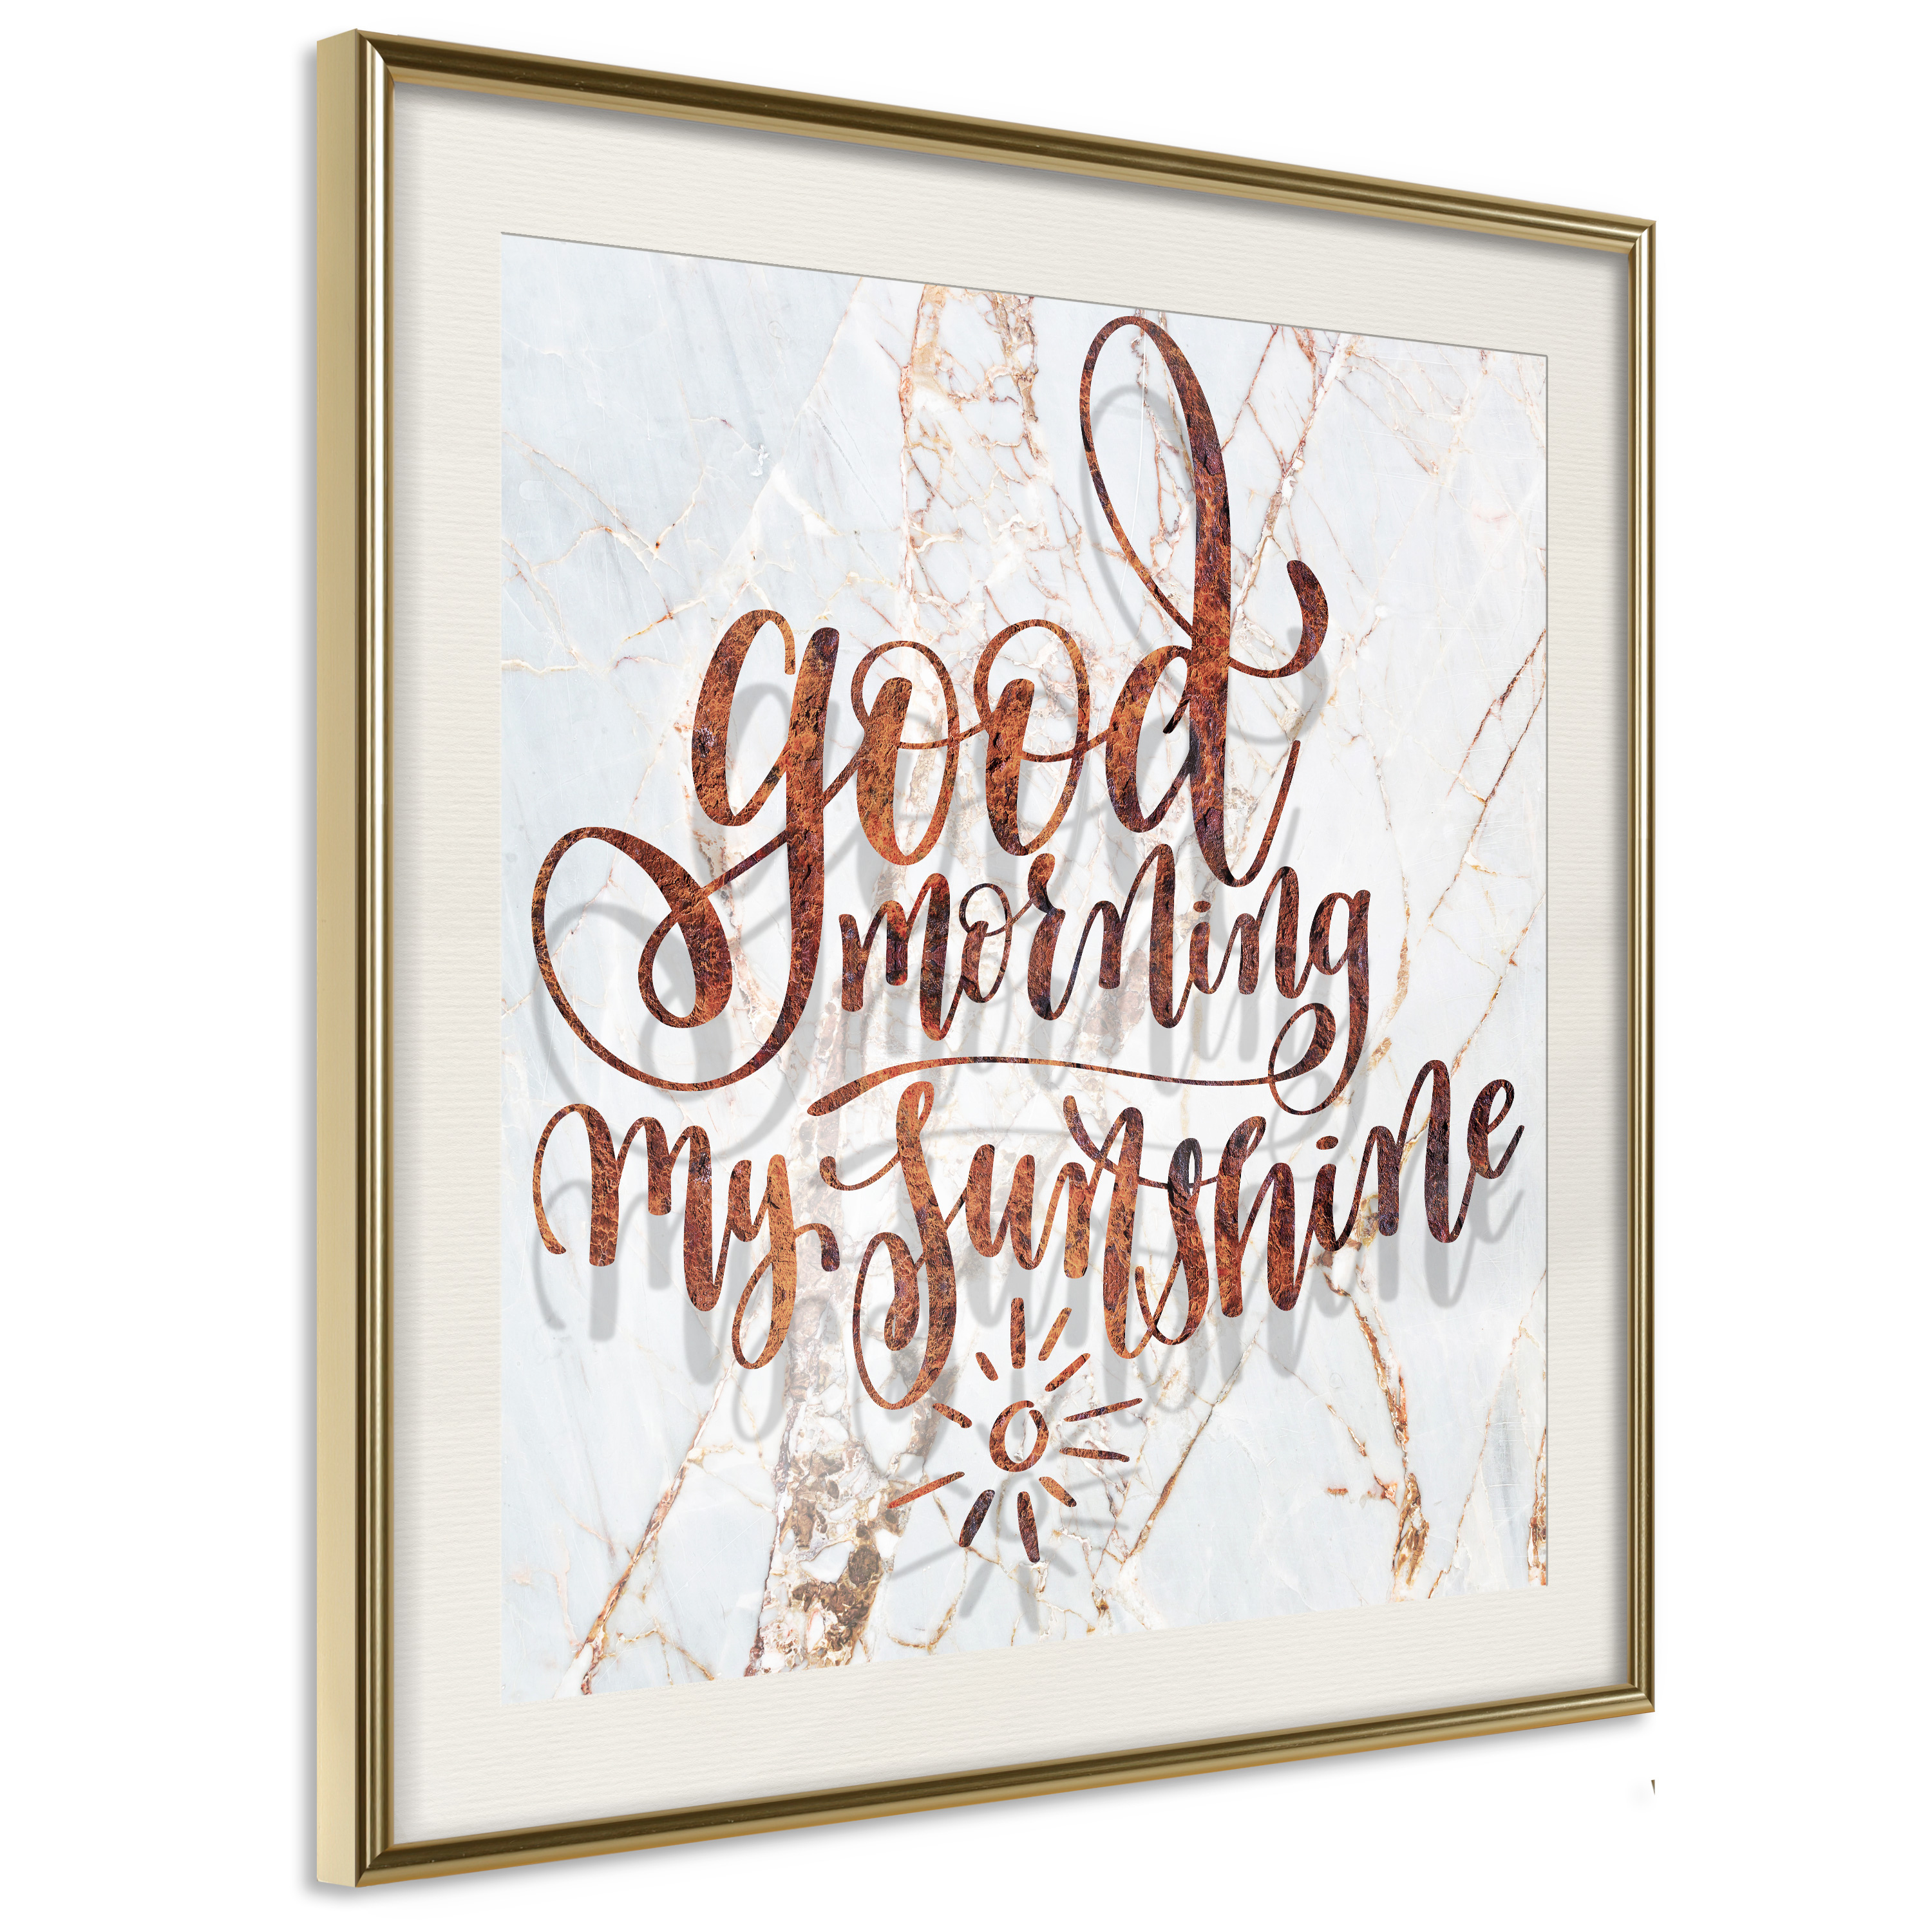 Poster - Good Morning (Square) - 20x20